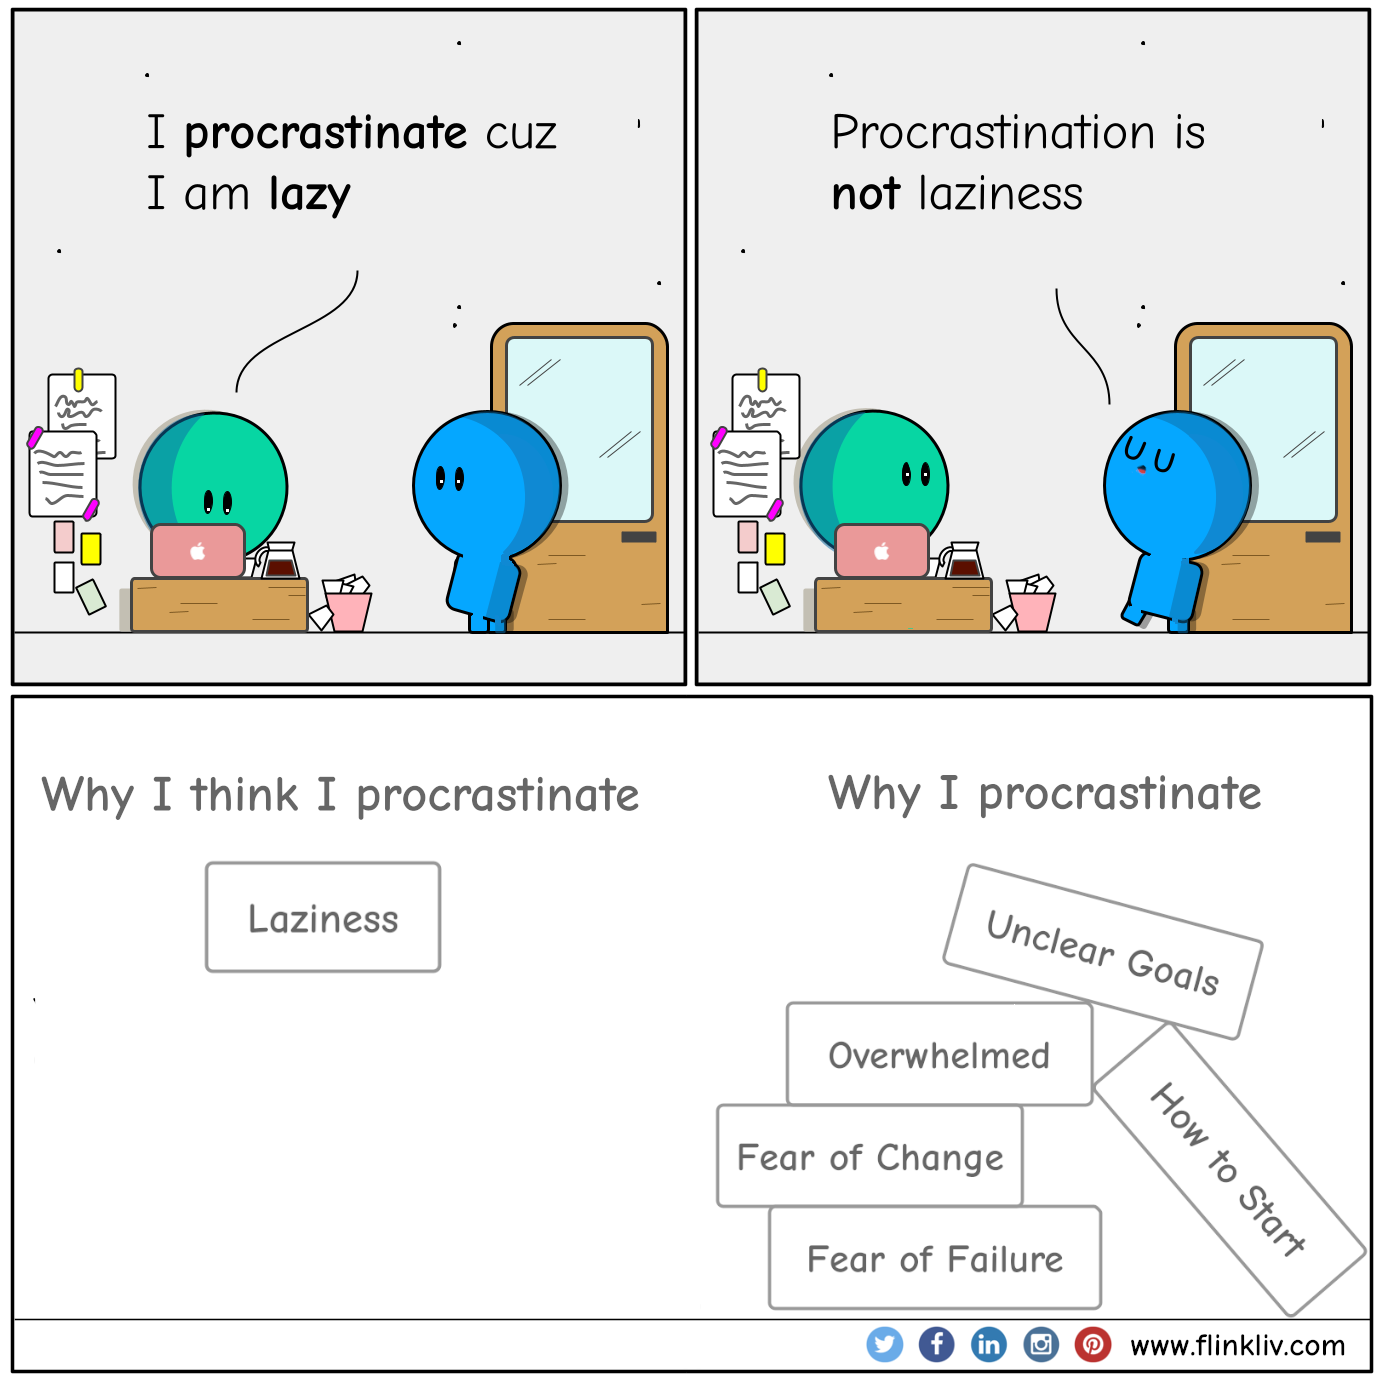 Conversation between A and B about procrastination.
					A: I procrastinate cuz I am lazy.
					B: Procrastination is not laziness.
					